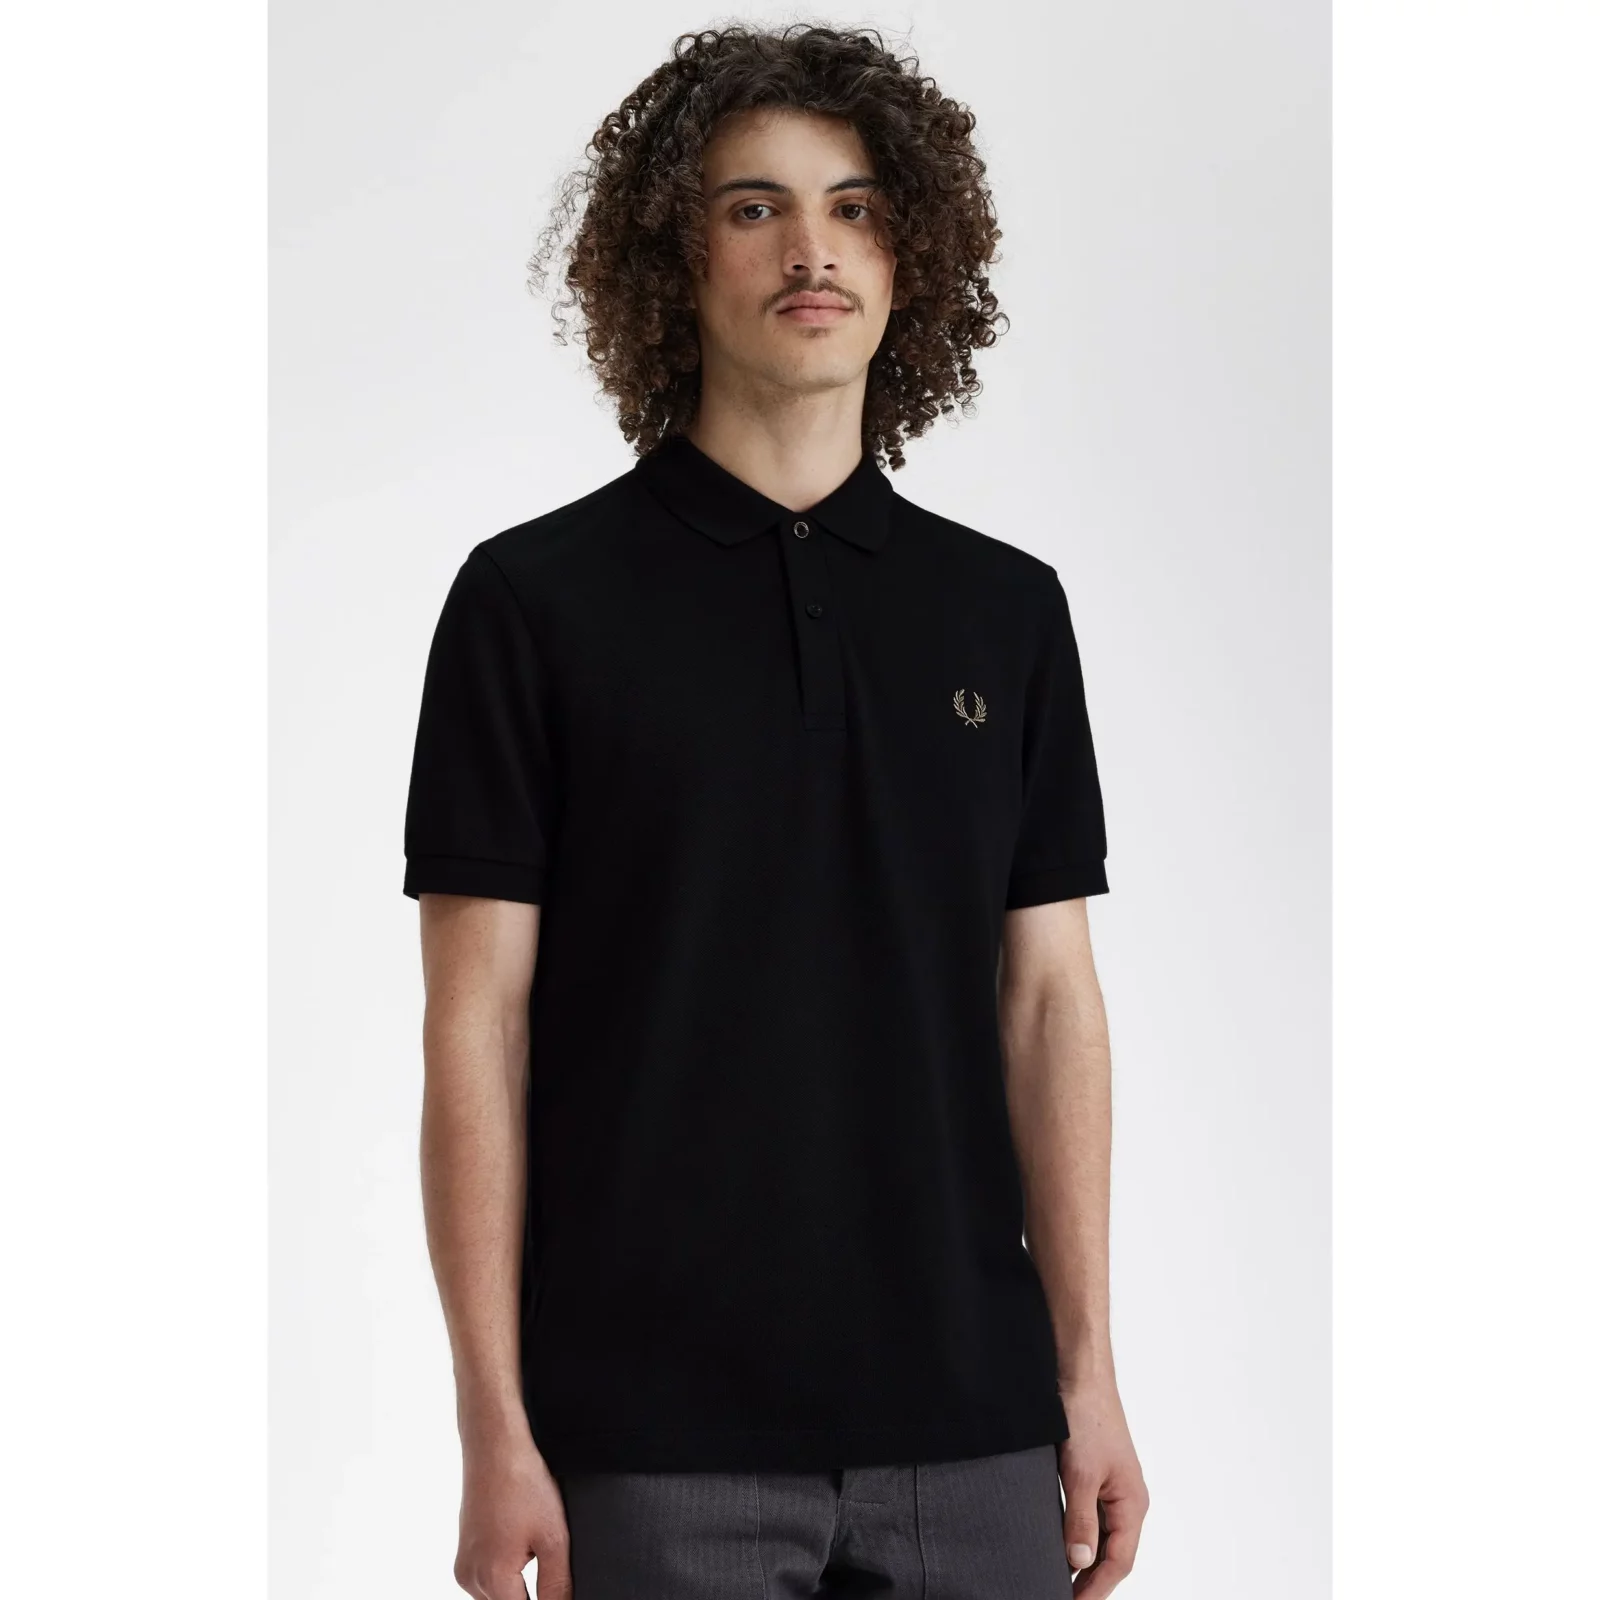 Fred-Perry_-M-6000-the-fred-perry-shirt_musta-hiekka_M6000_U78